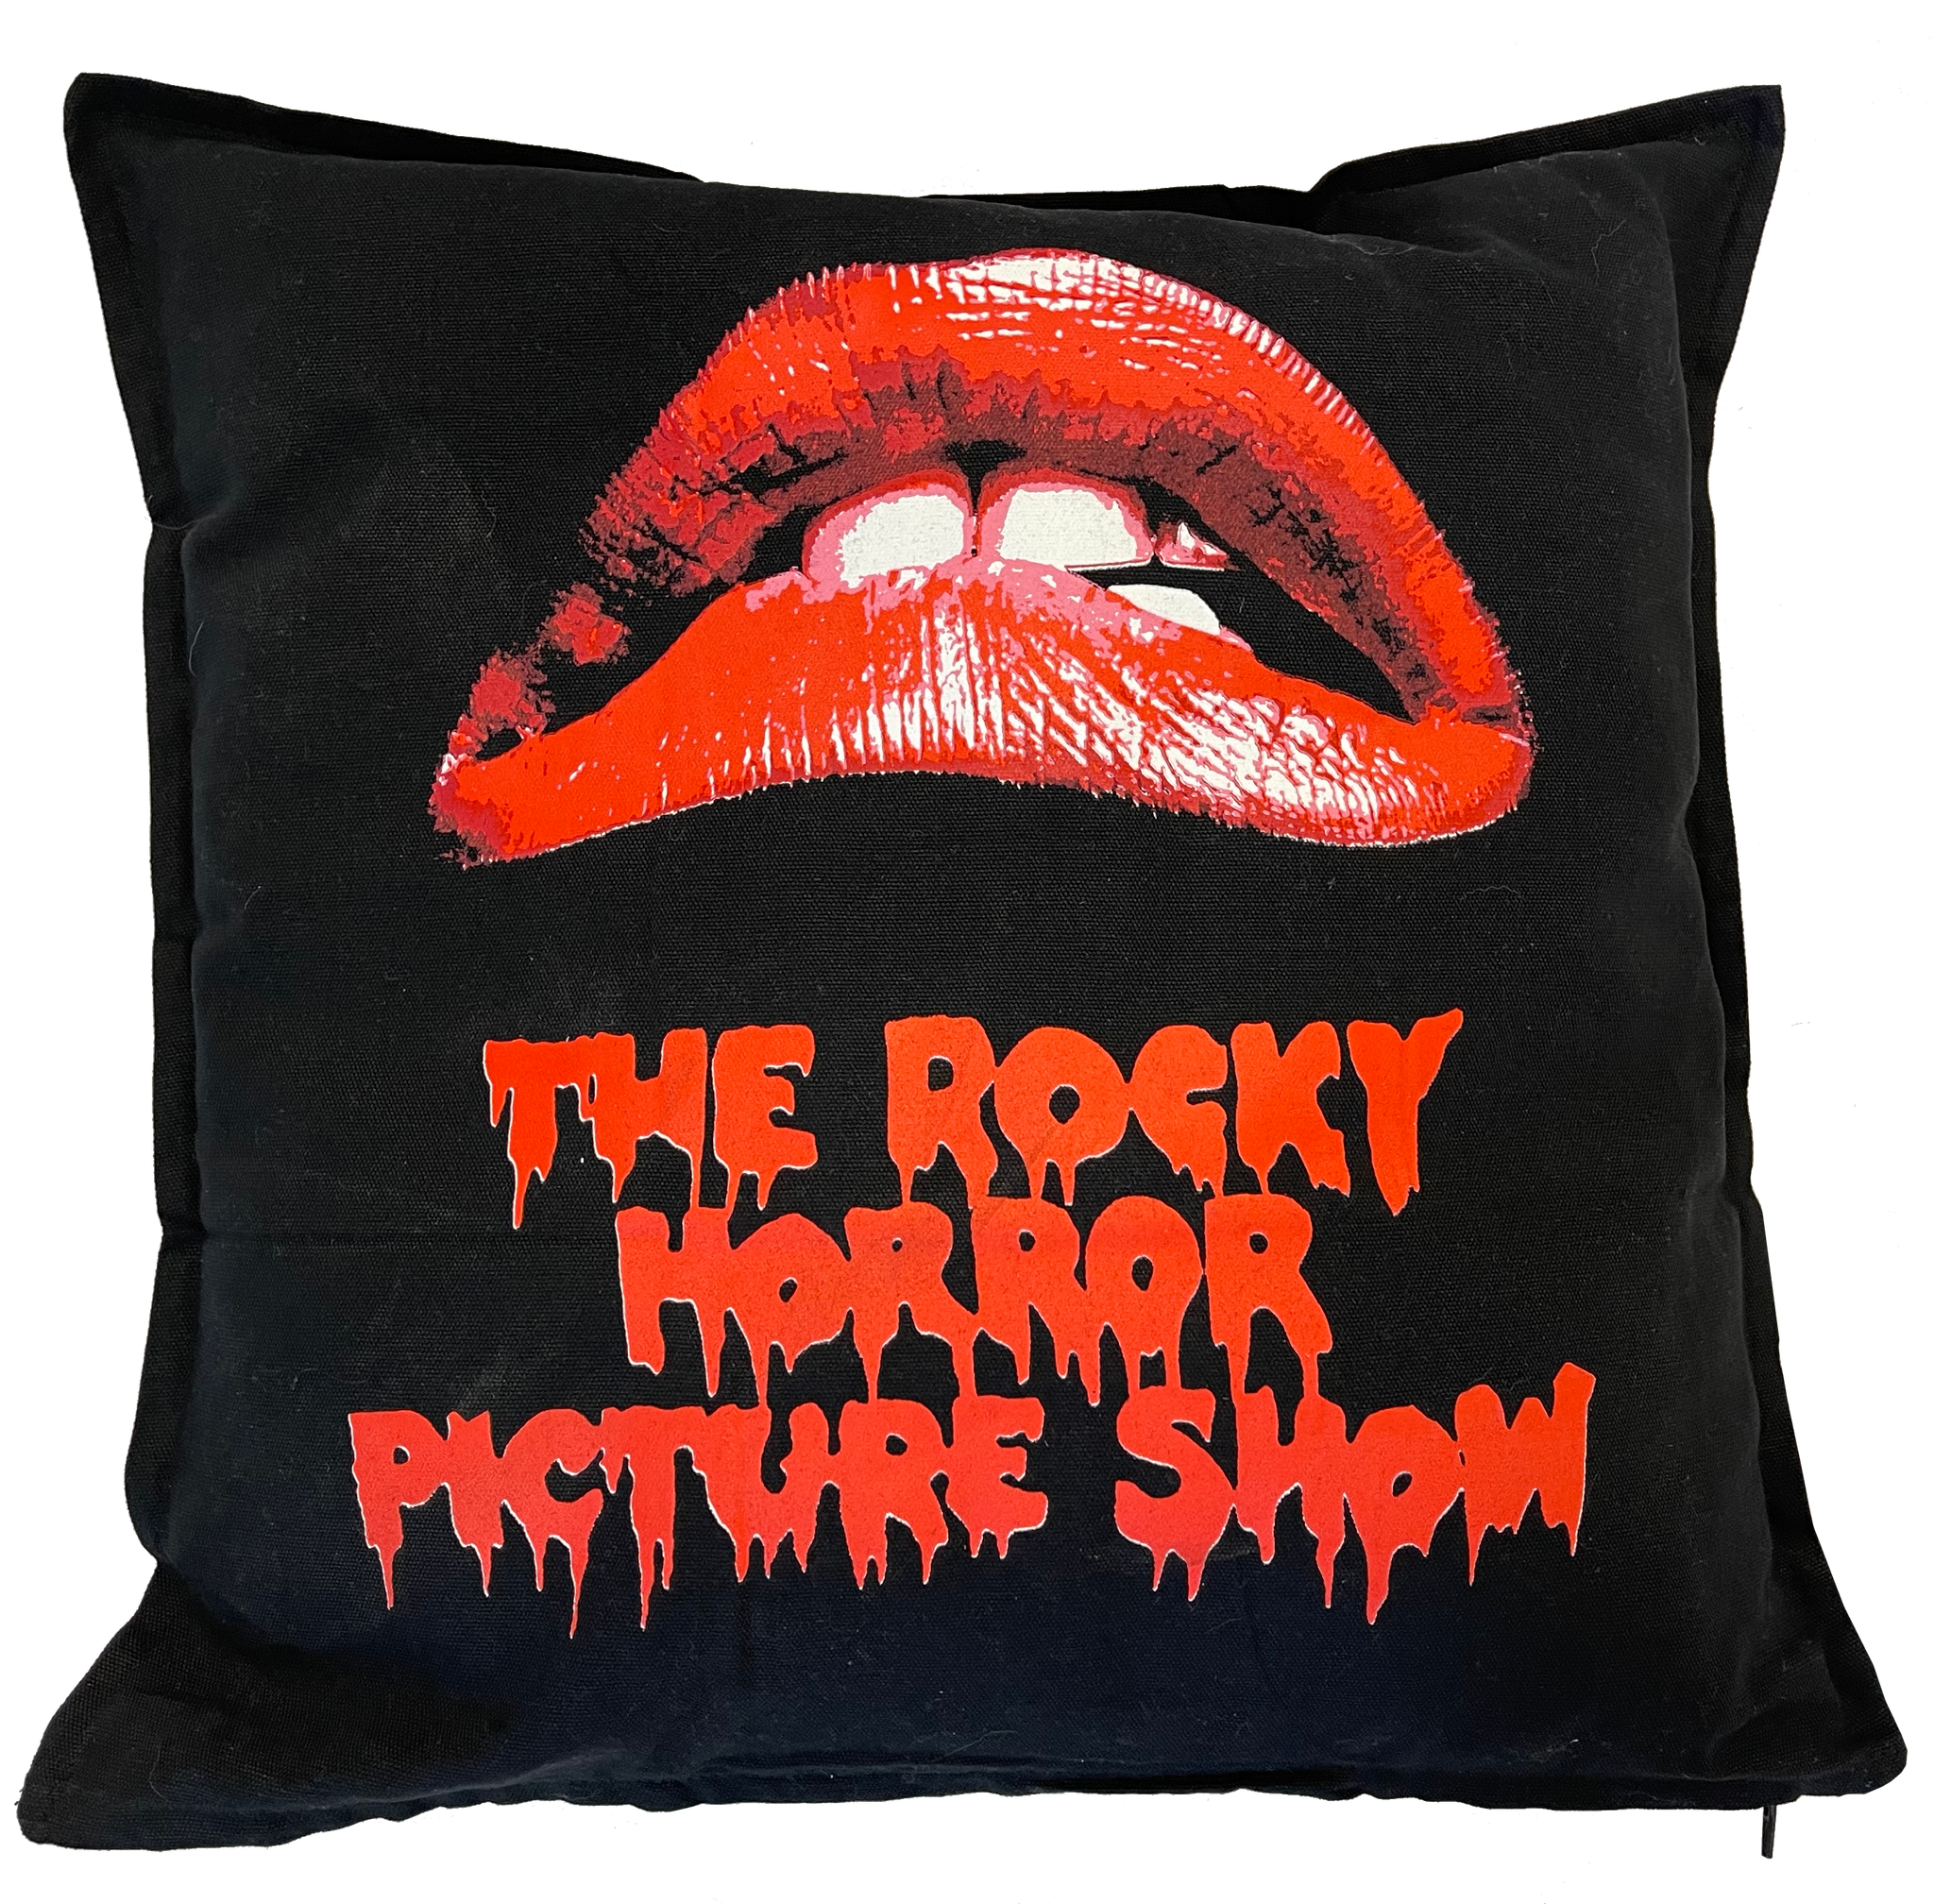 ROCKY HORROR PICTURE SHOW "LIPS" SQUARE PILLOW